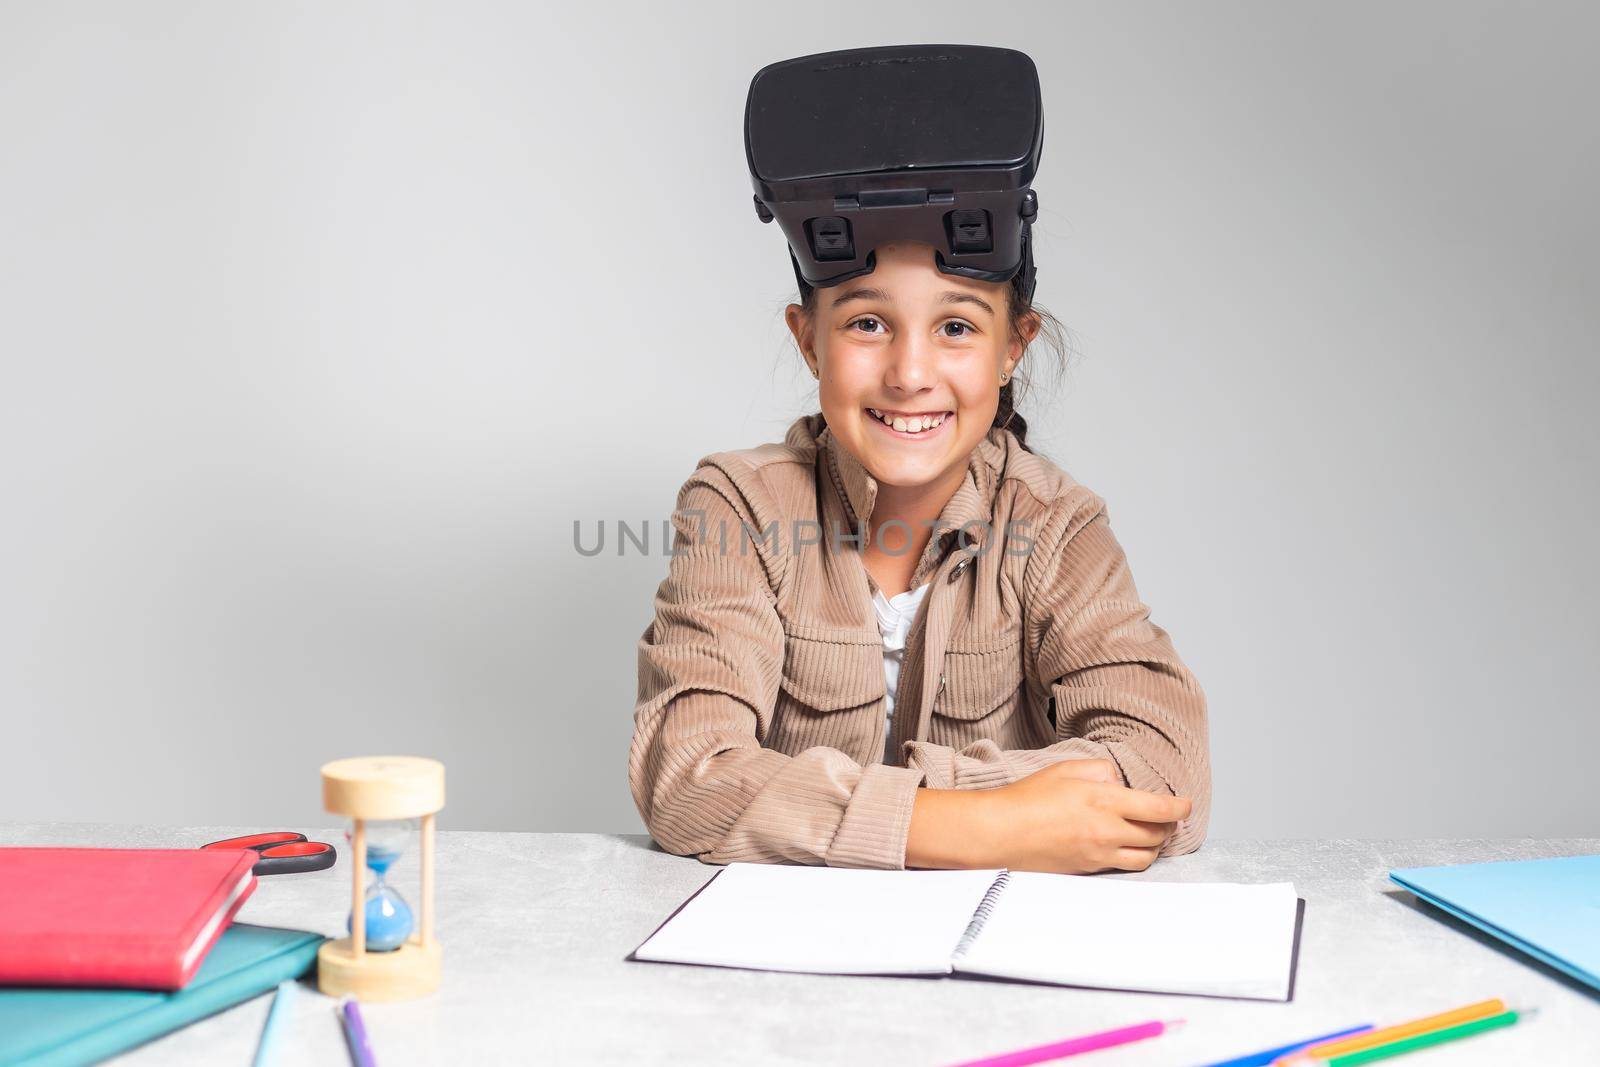 little girl with virtual reality headset. Innovation technology and education concept